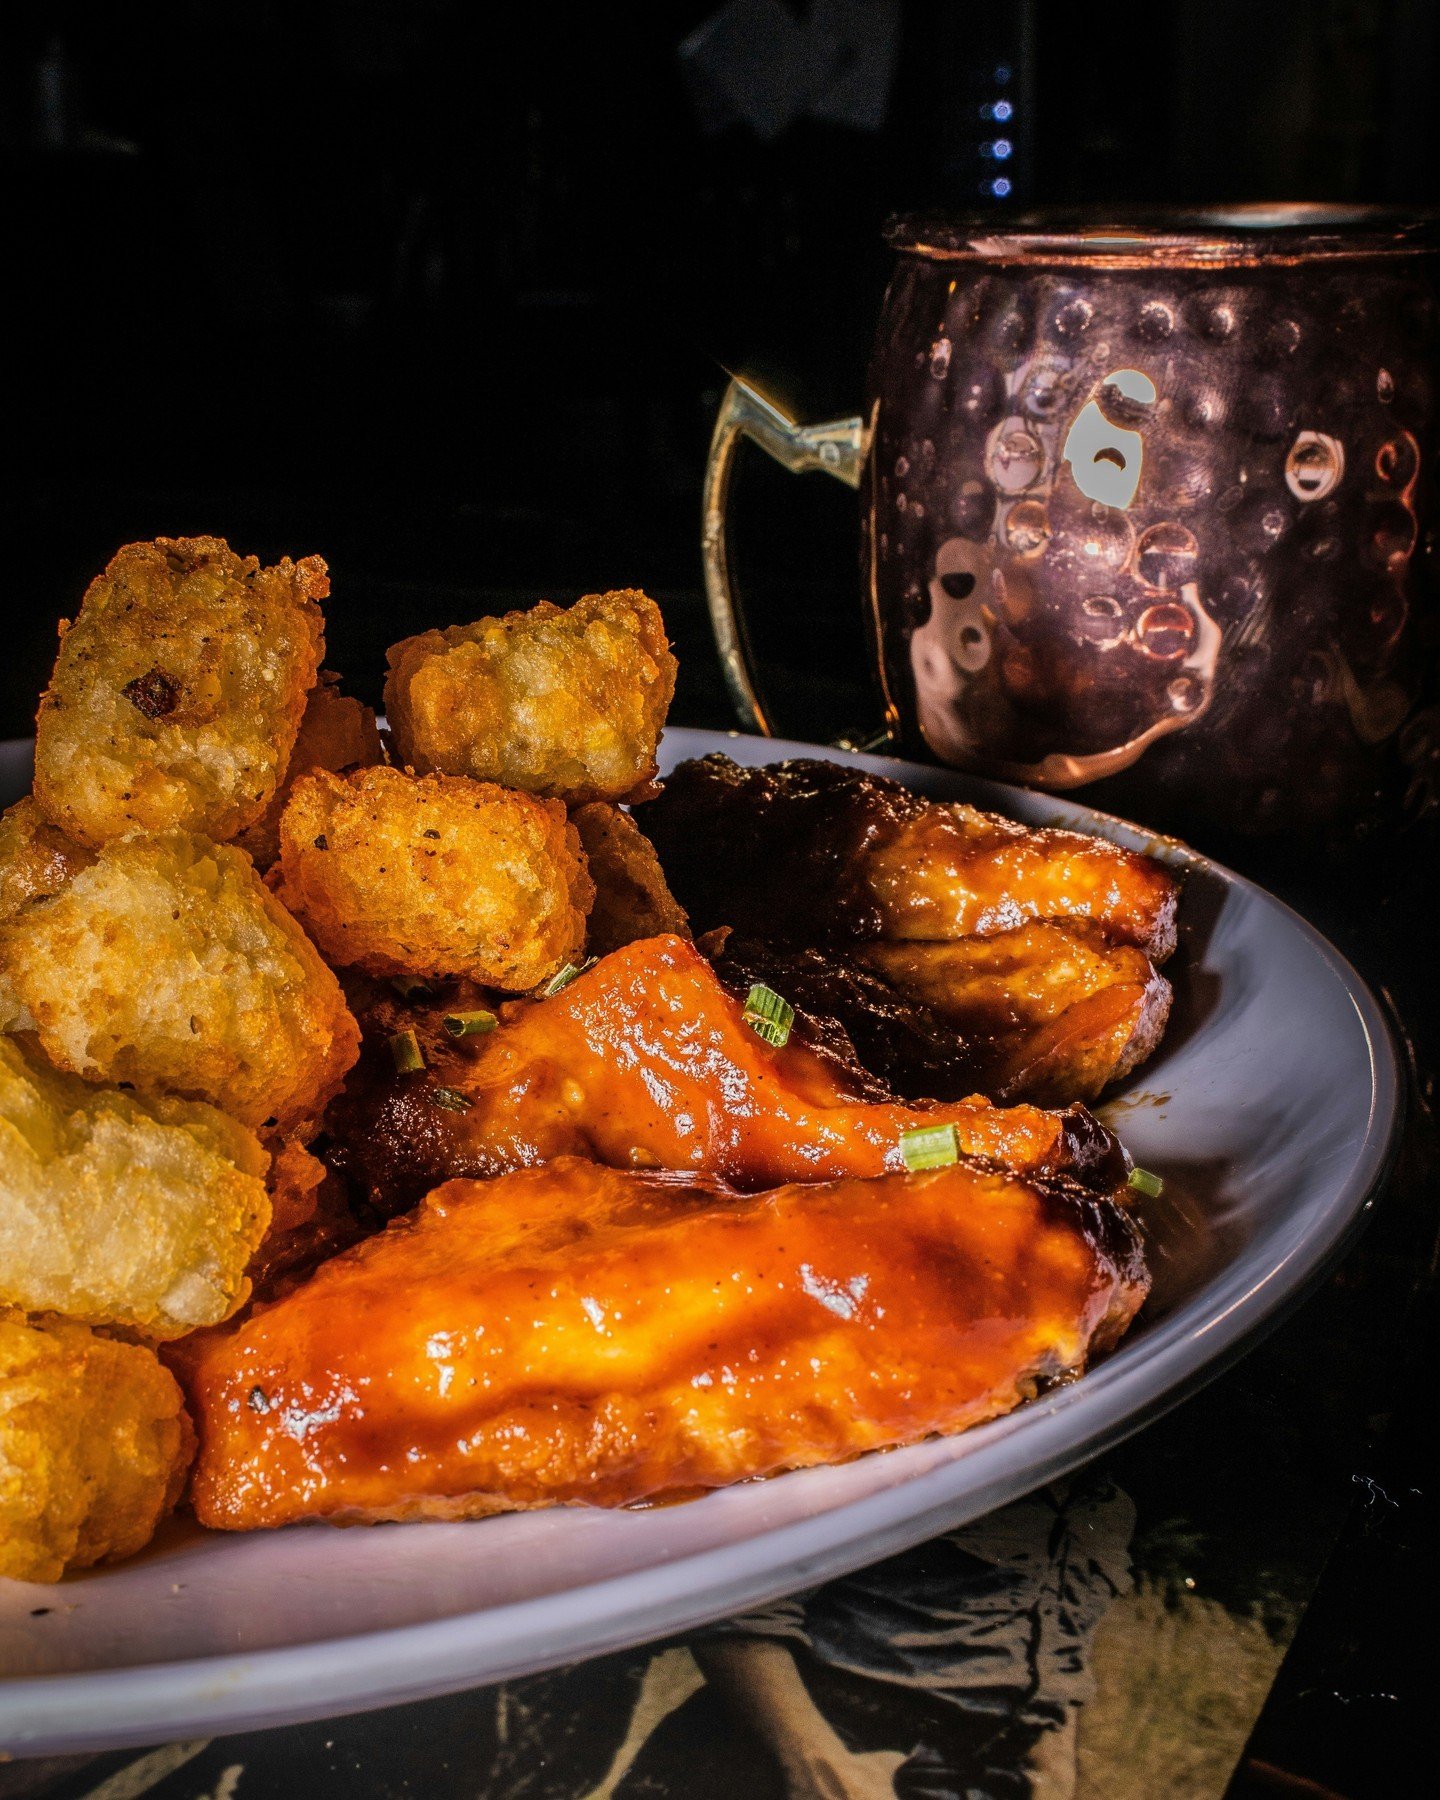 Bringing the heat with these saucy wings and crispy tater tots - the perfect combo for a chill night! 🍗🔥🥔